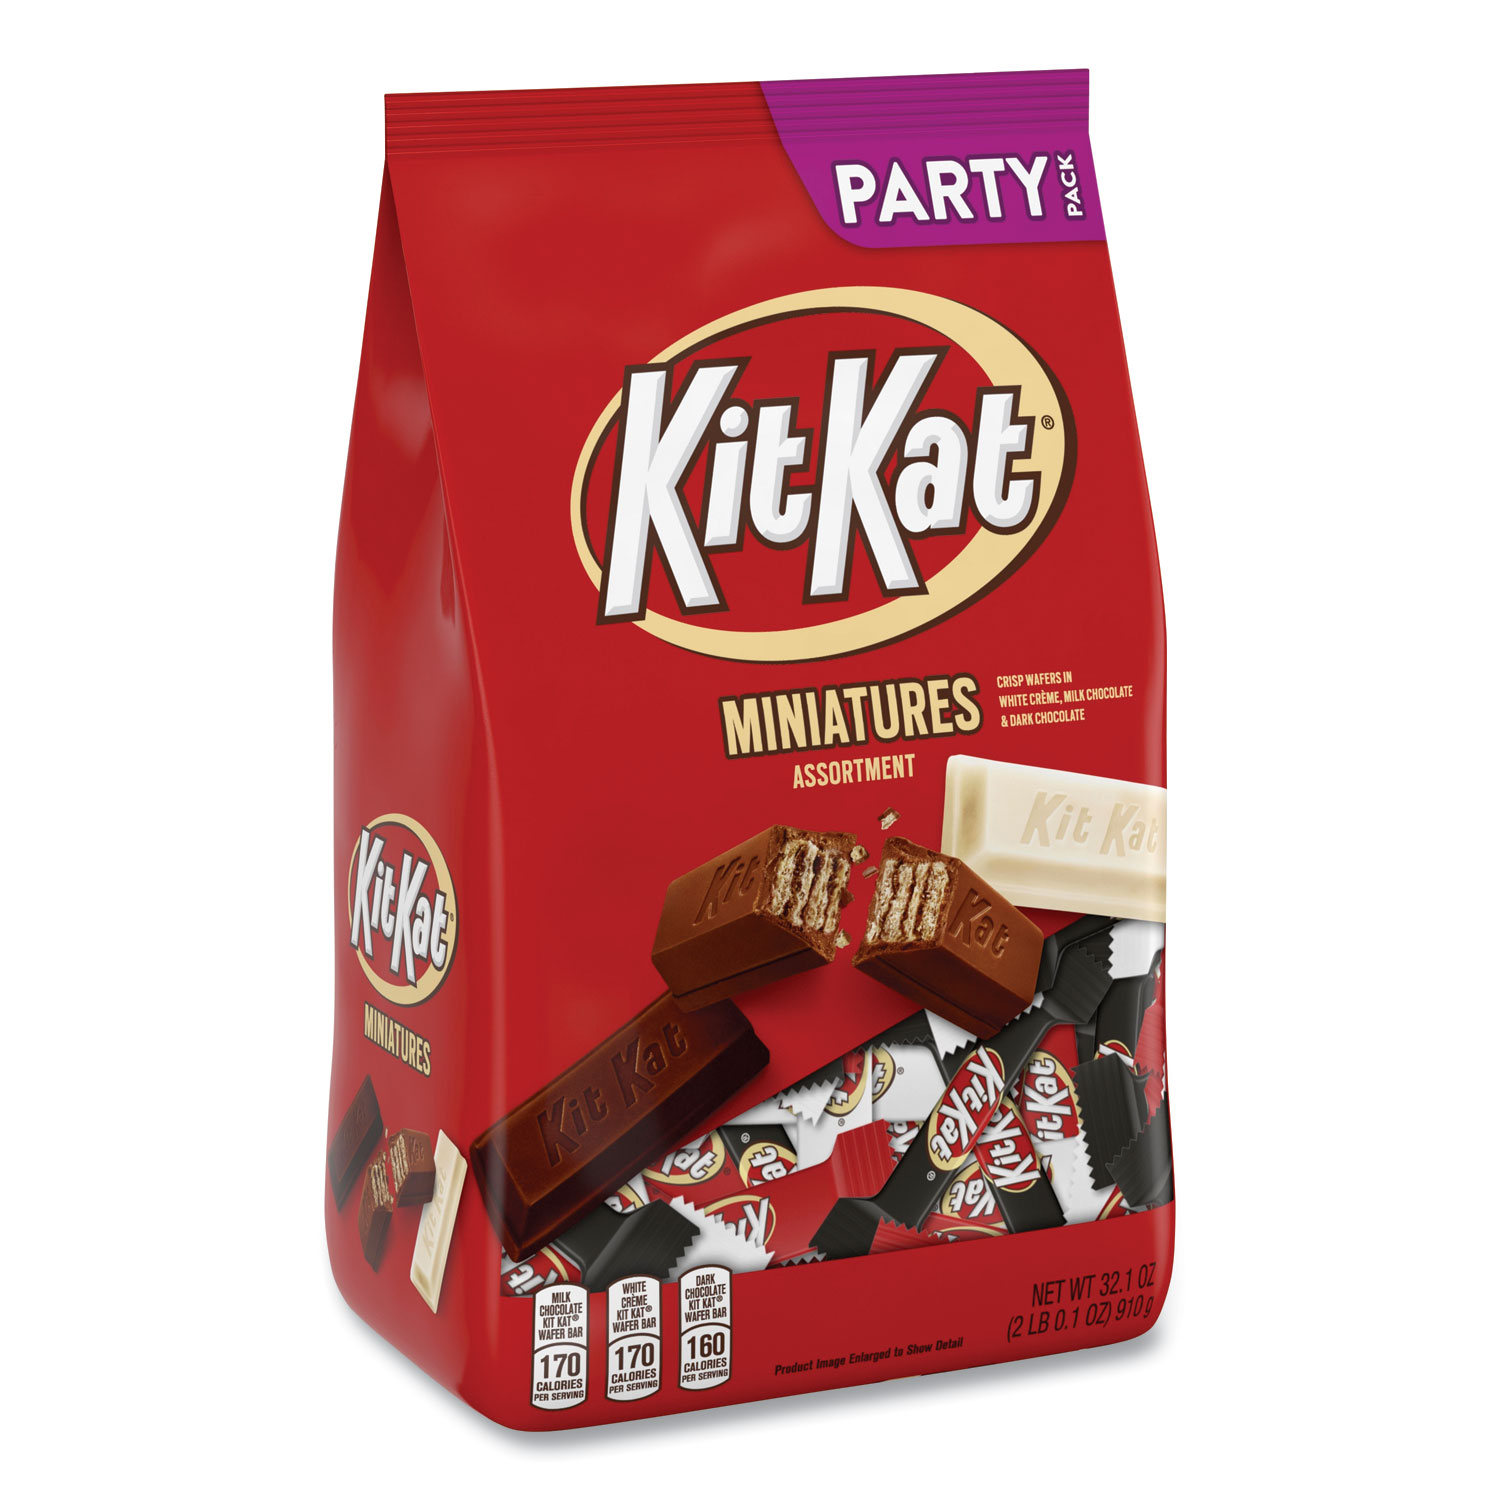  Kit Kat 22673 Miniatures Party Bag, Assorted, 32.1 oz, Free Delivery in 1-4 Business Days (GRR24600414) 